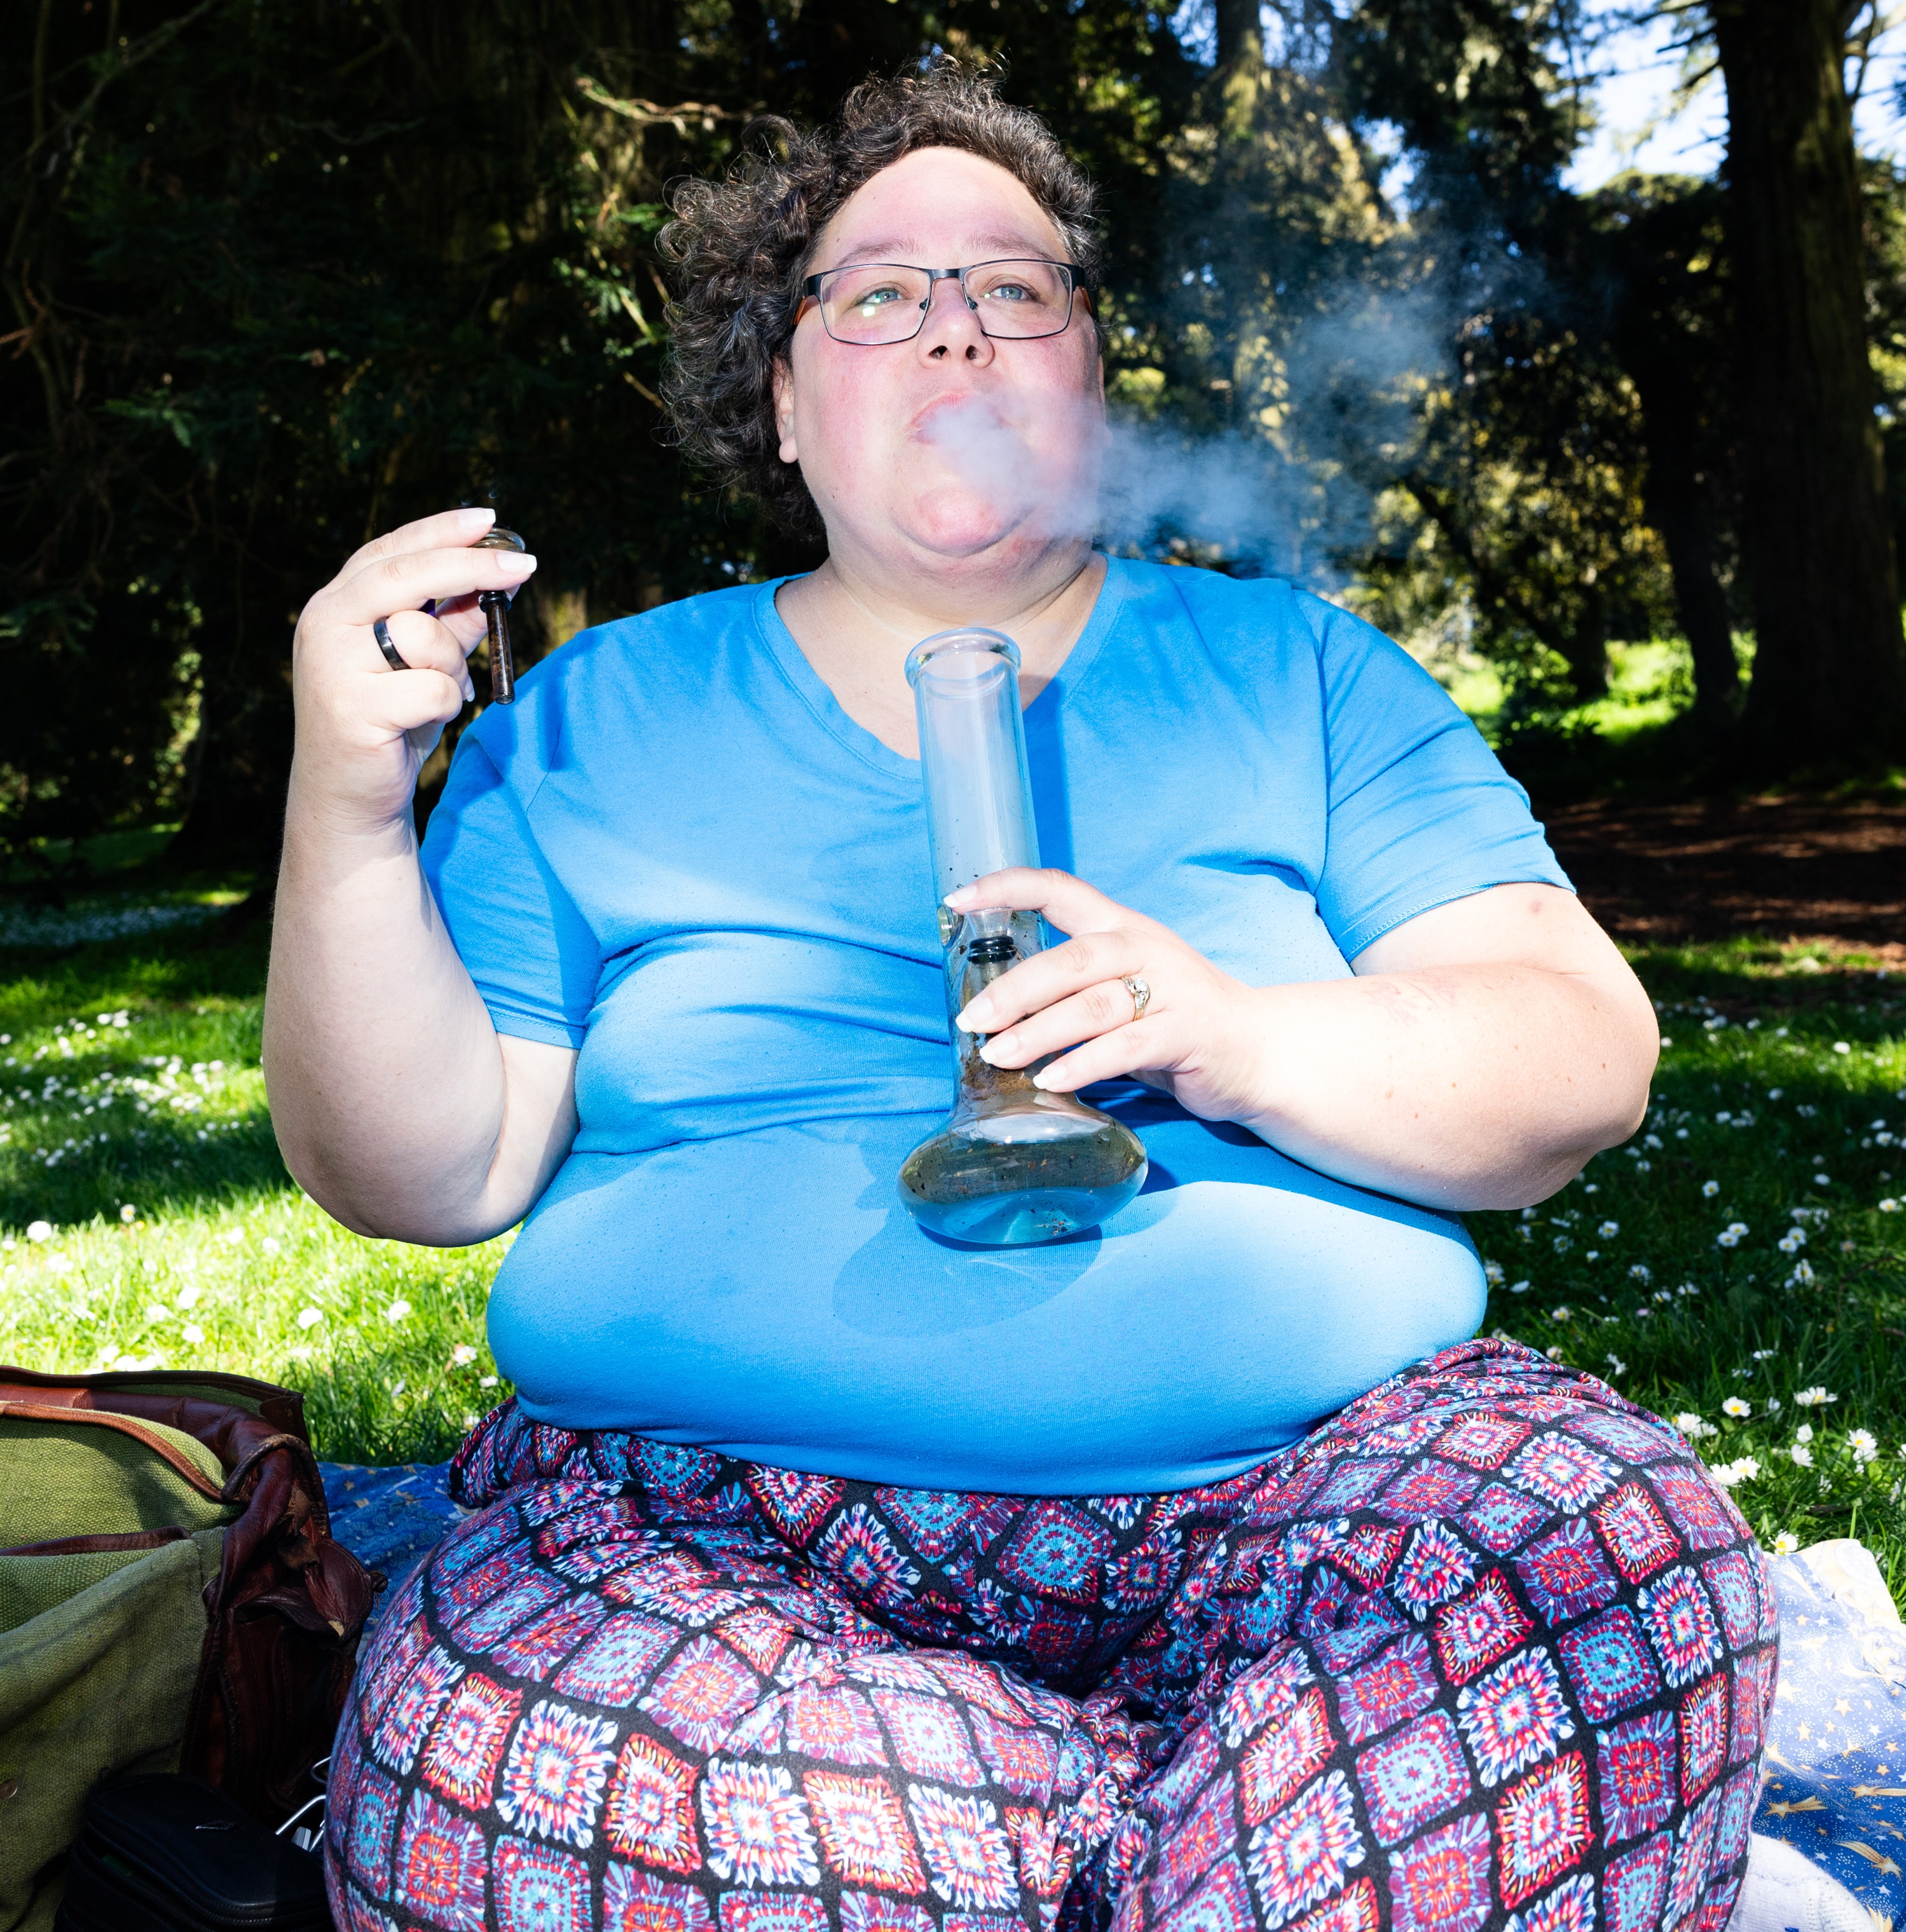 A person is sitting outdoors, inhaling from a bong with smoke visible, and holding a lighter.